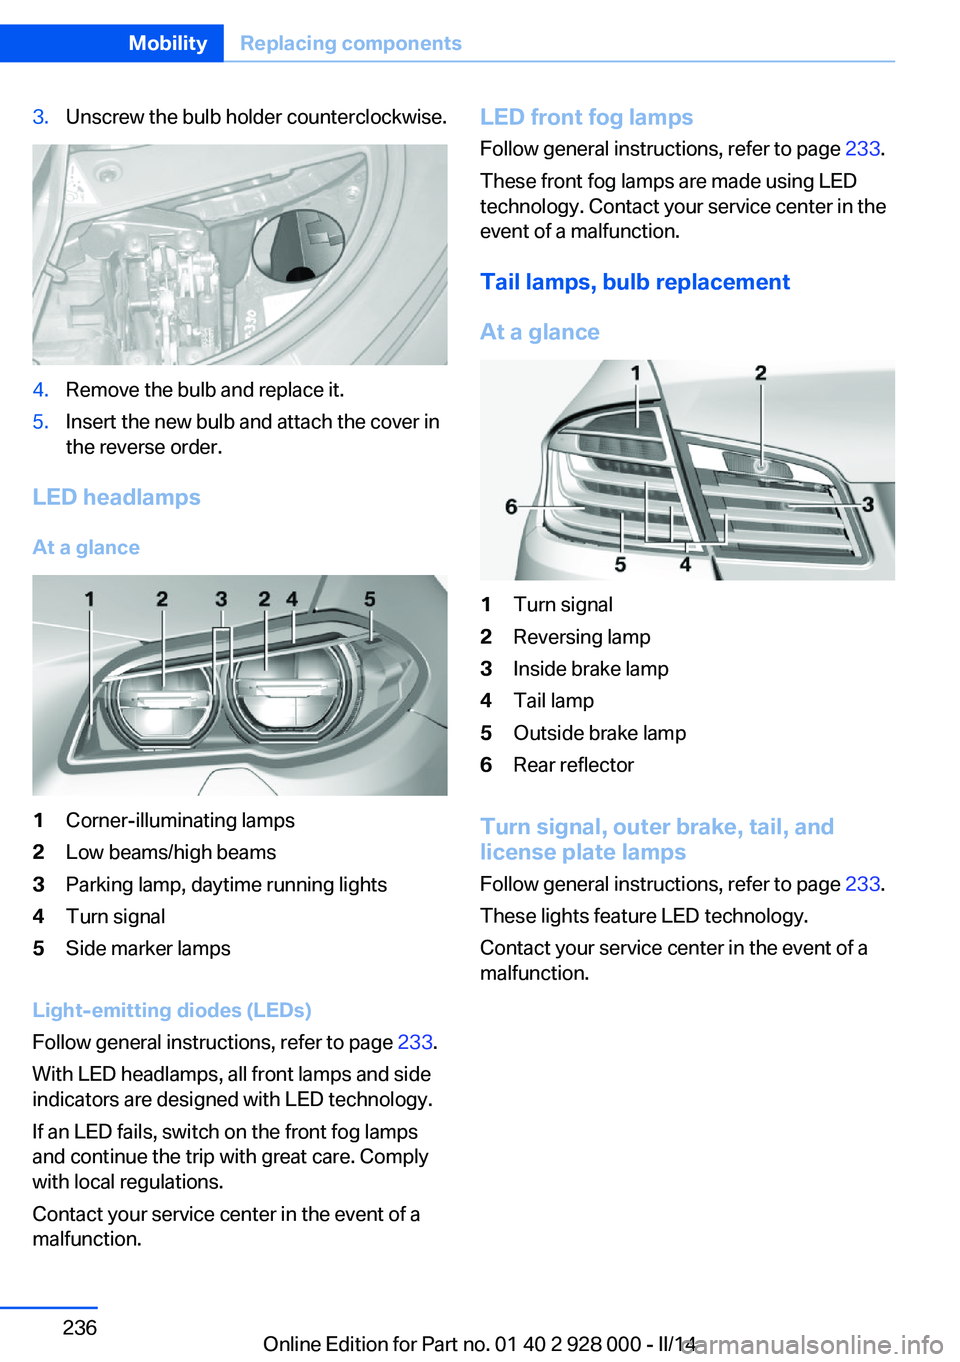 BMW 528I XDRIVE 2014  Owners Manual 3.Unscrew the bulb holder counterclockwise.4.Remove the bulb and replace it.5.Insert the new bulb and attach the cover in
the reverse order.
LED headlamps
At a glance
1Corner-illuminating lamps2Low be